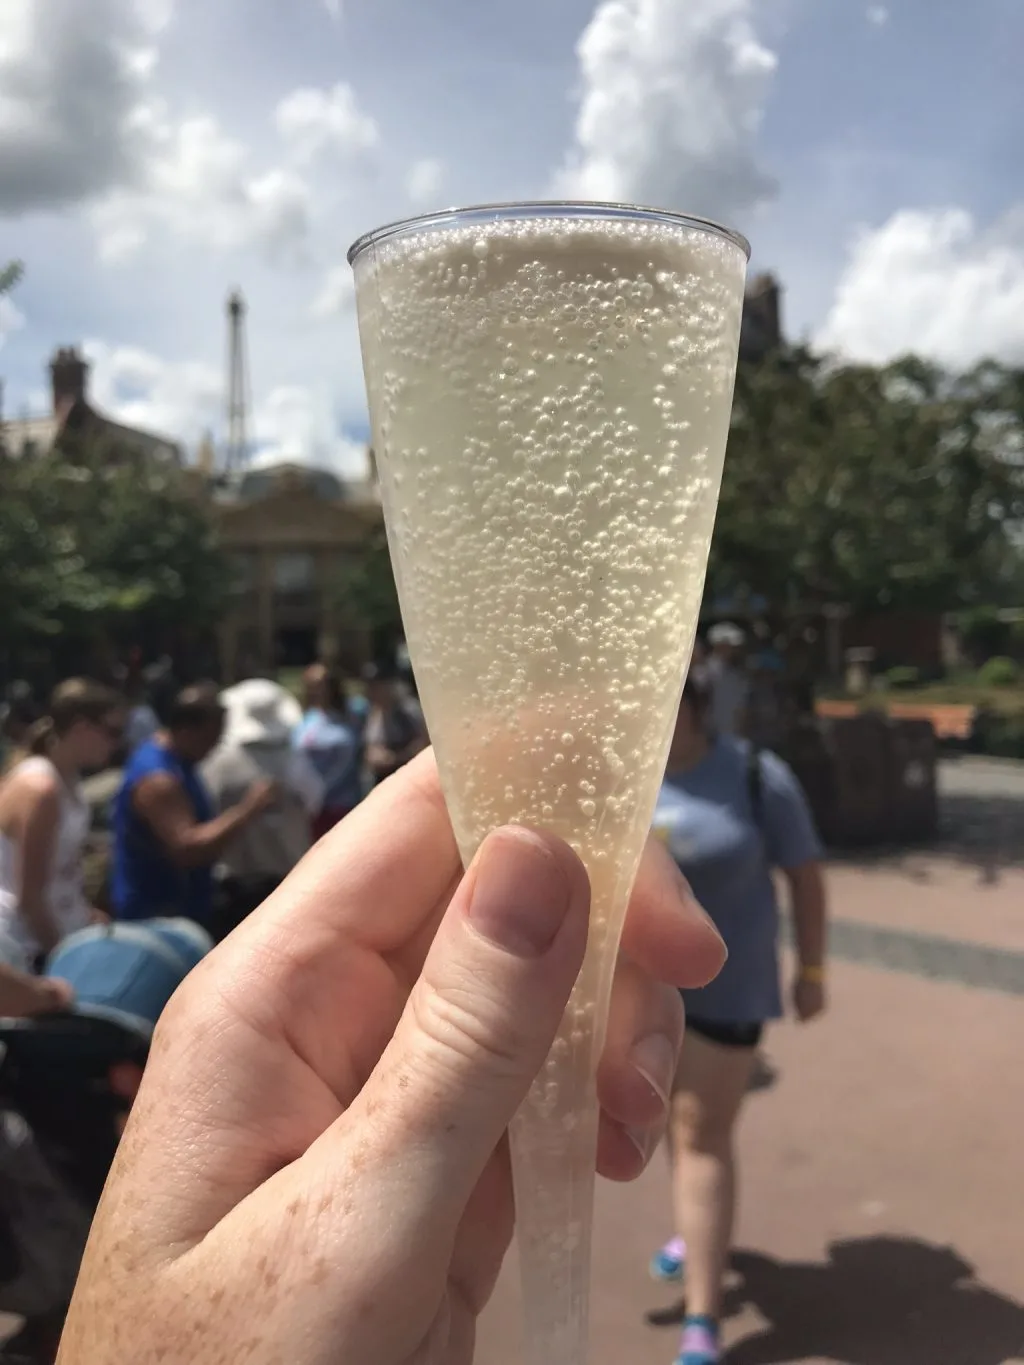 bubbly adult beverage with people in the background